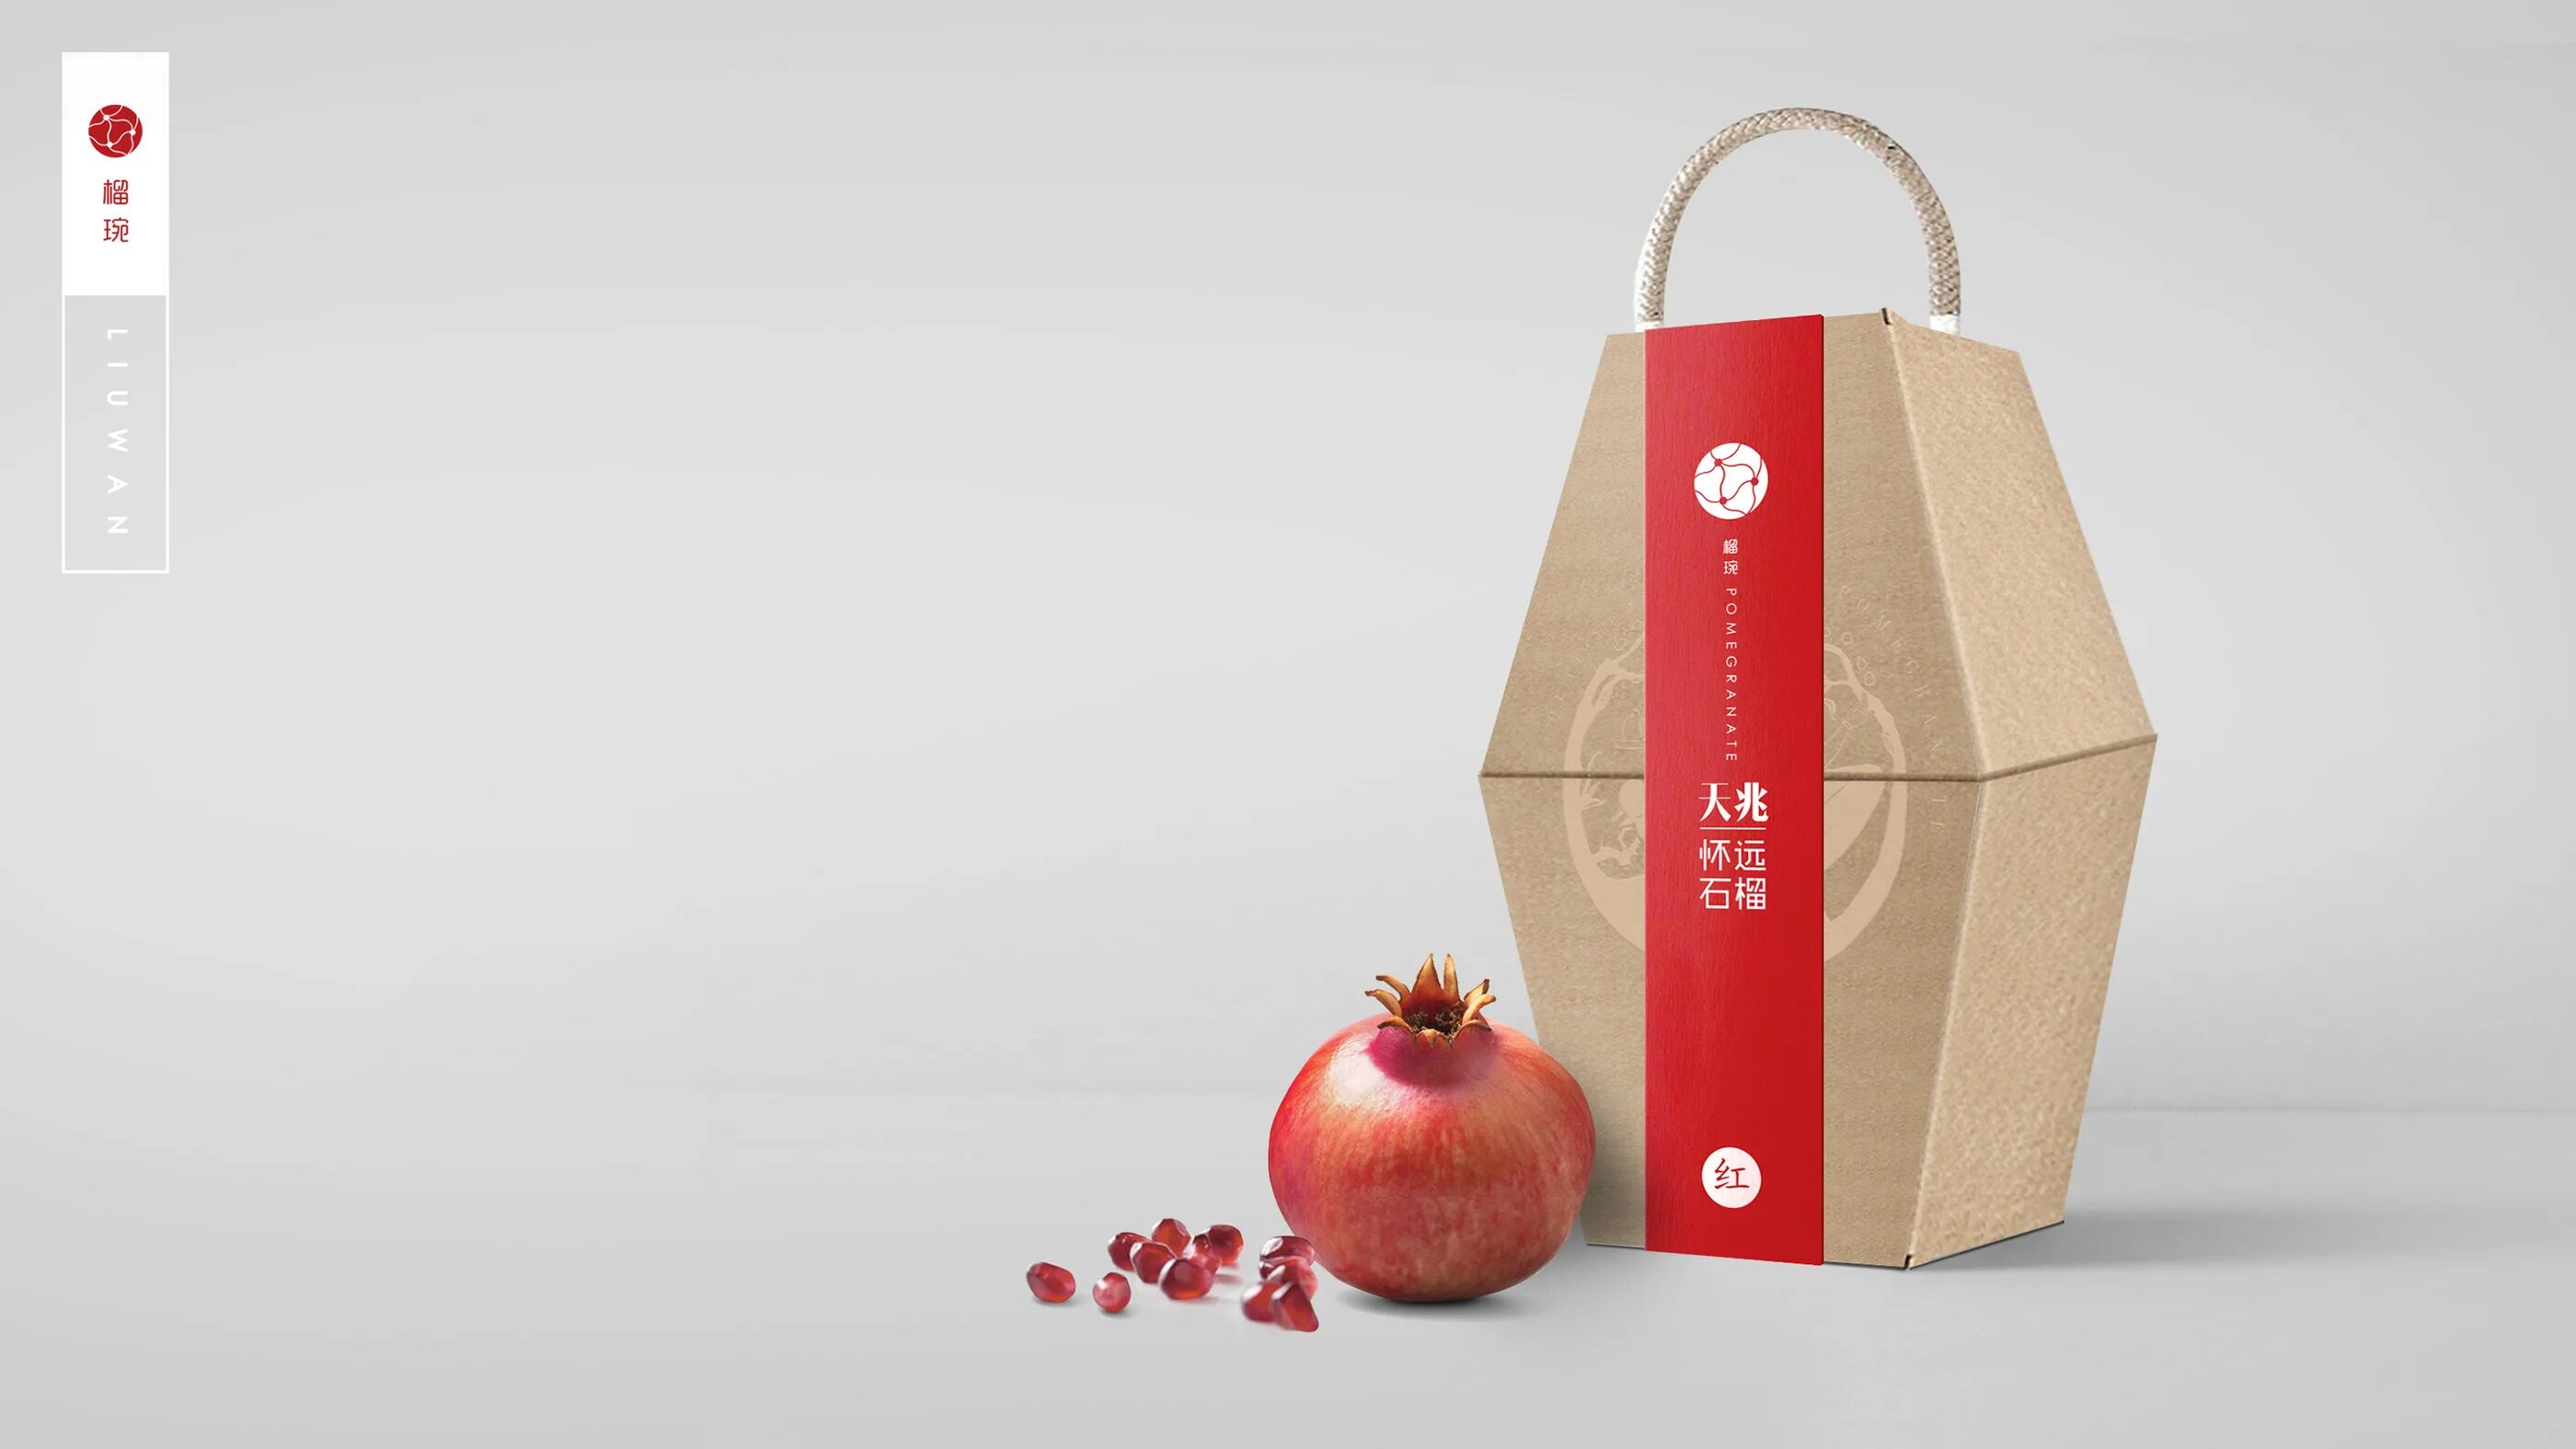 Without package. Pomegranate Packaging. Package logo Design. Packing logo Design. Packages with logo.